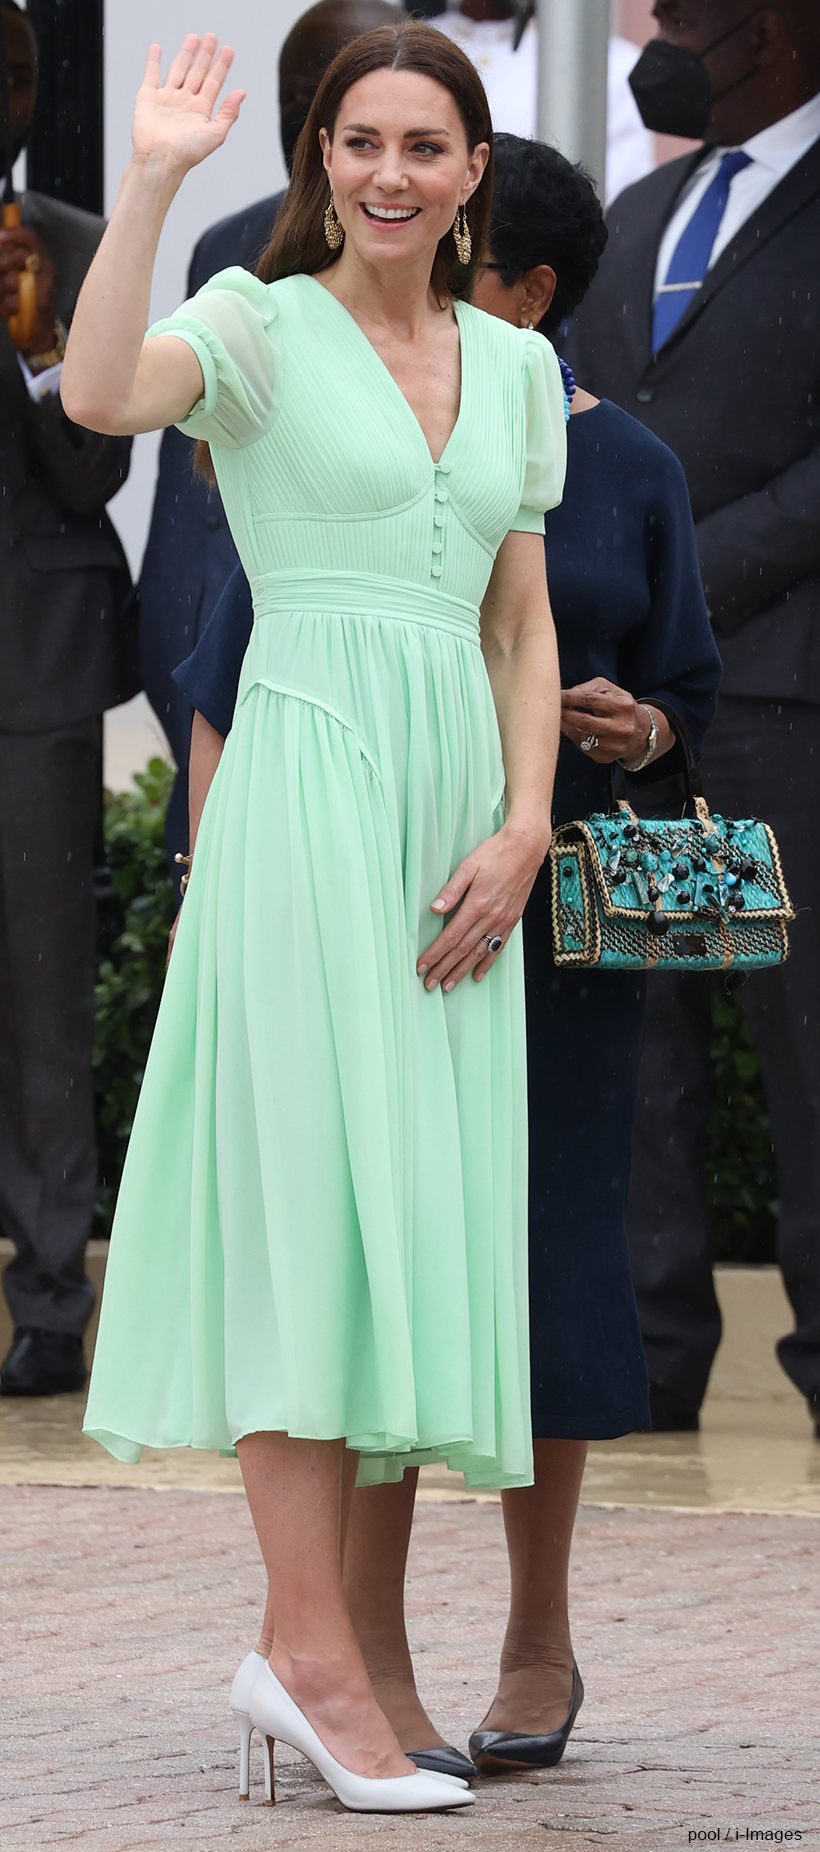 Kate Middleton in the Bahamas, waving. She's wearing a green dress by Self Portrait and white shoes by Jimmy Choo